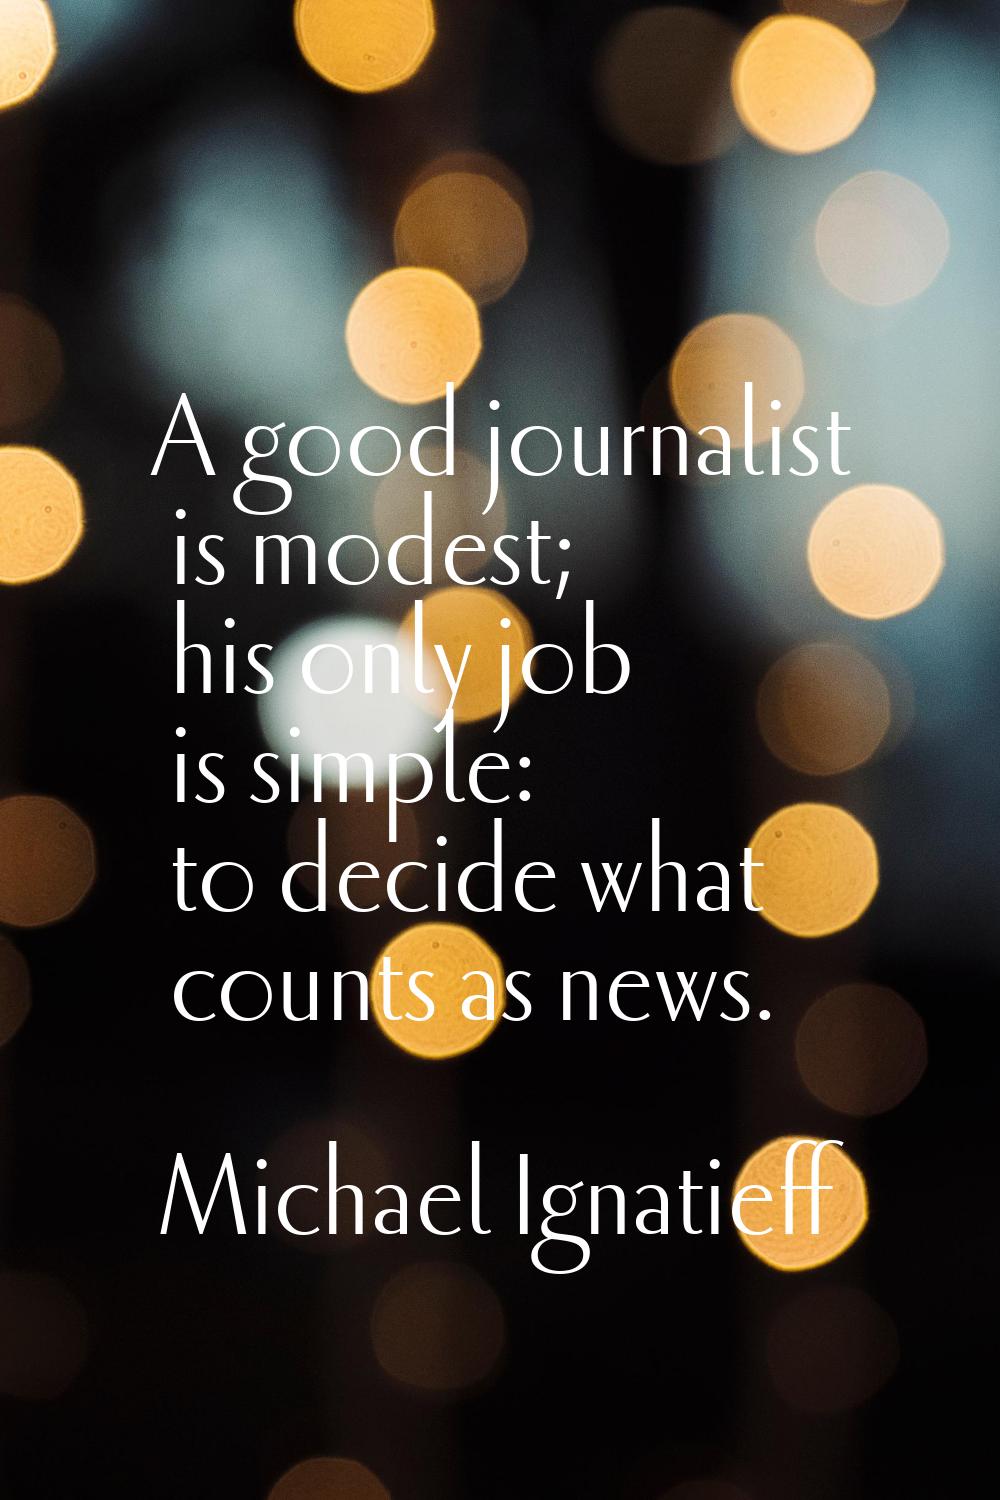 A good journalist is modest; his only job is simple: to decide what counts as news.